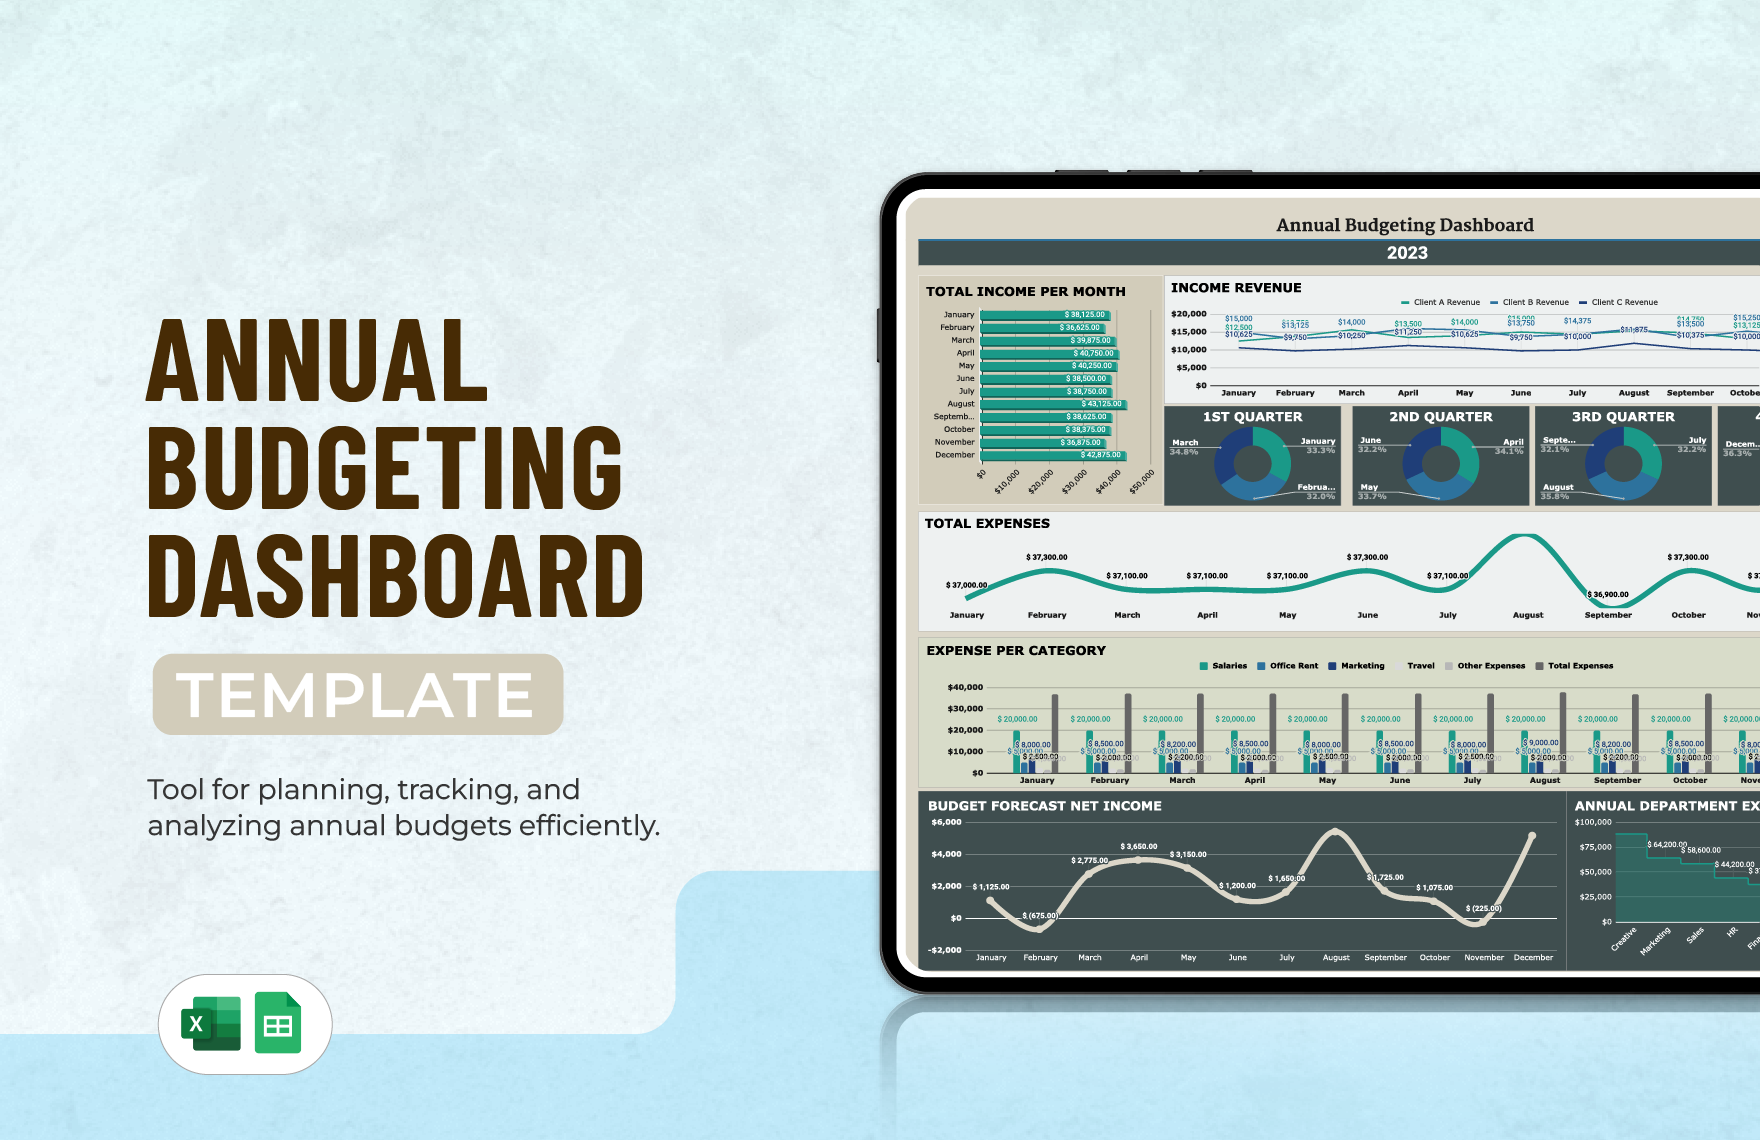 Annual Budgeting Dashboard Template in Excel, Google Sheets